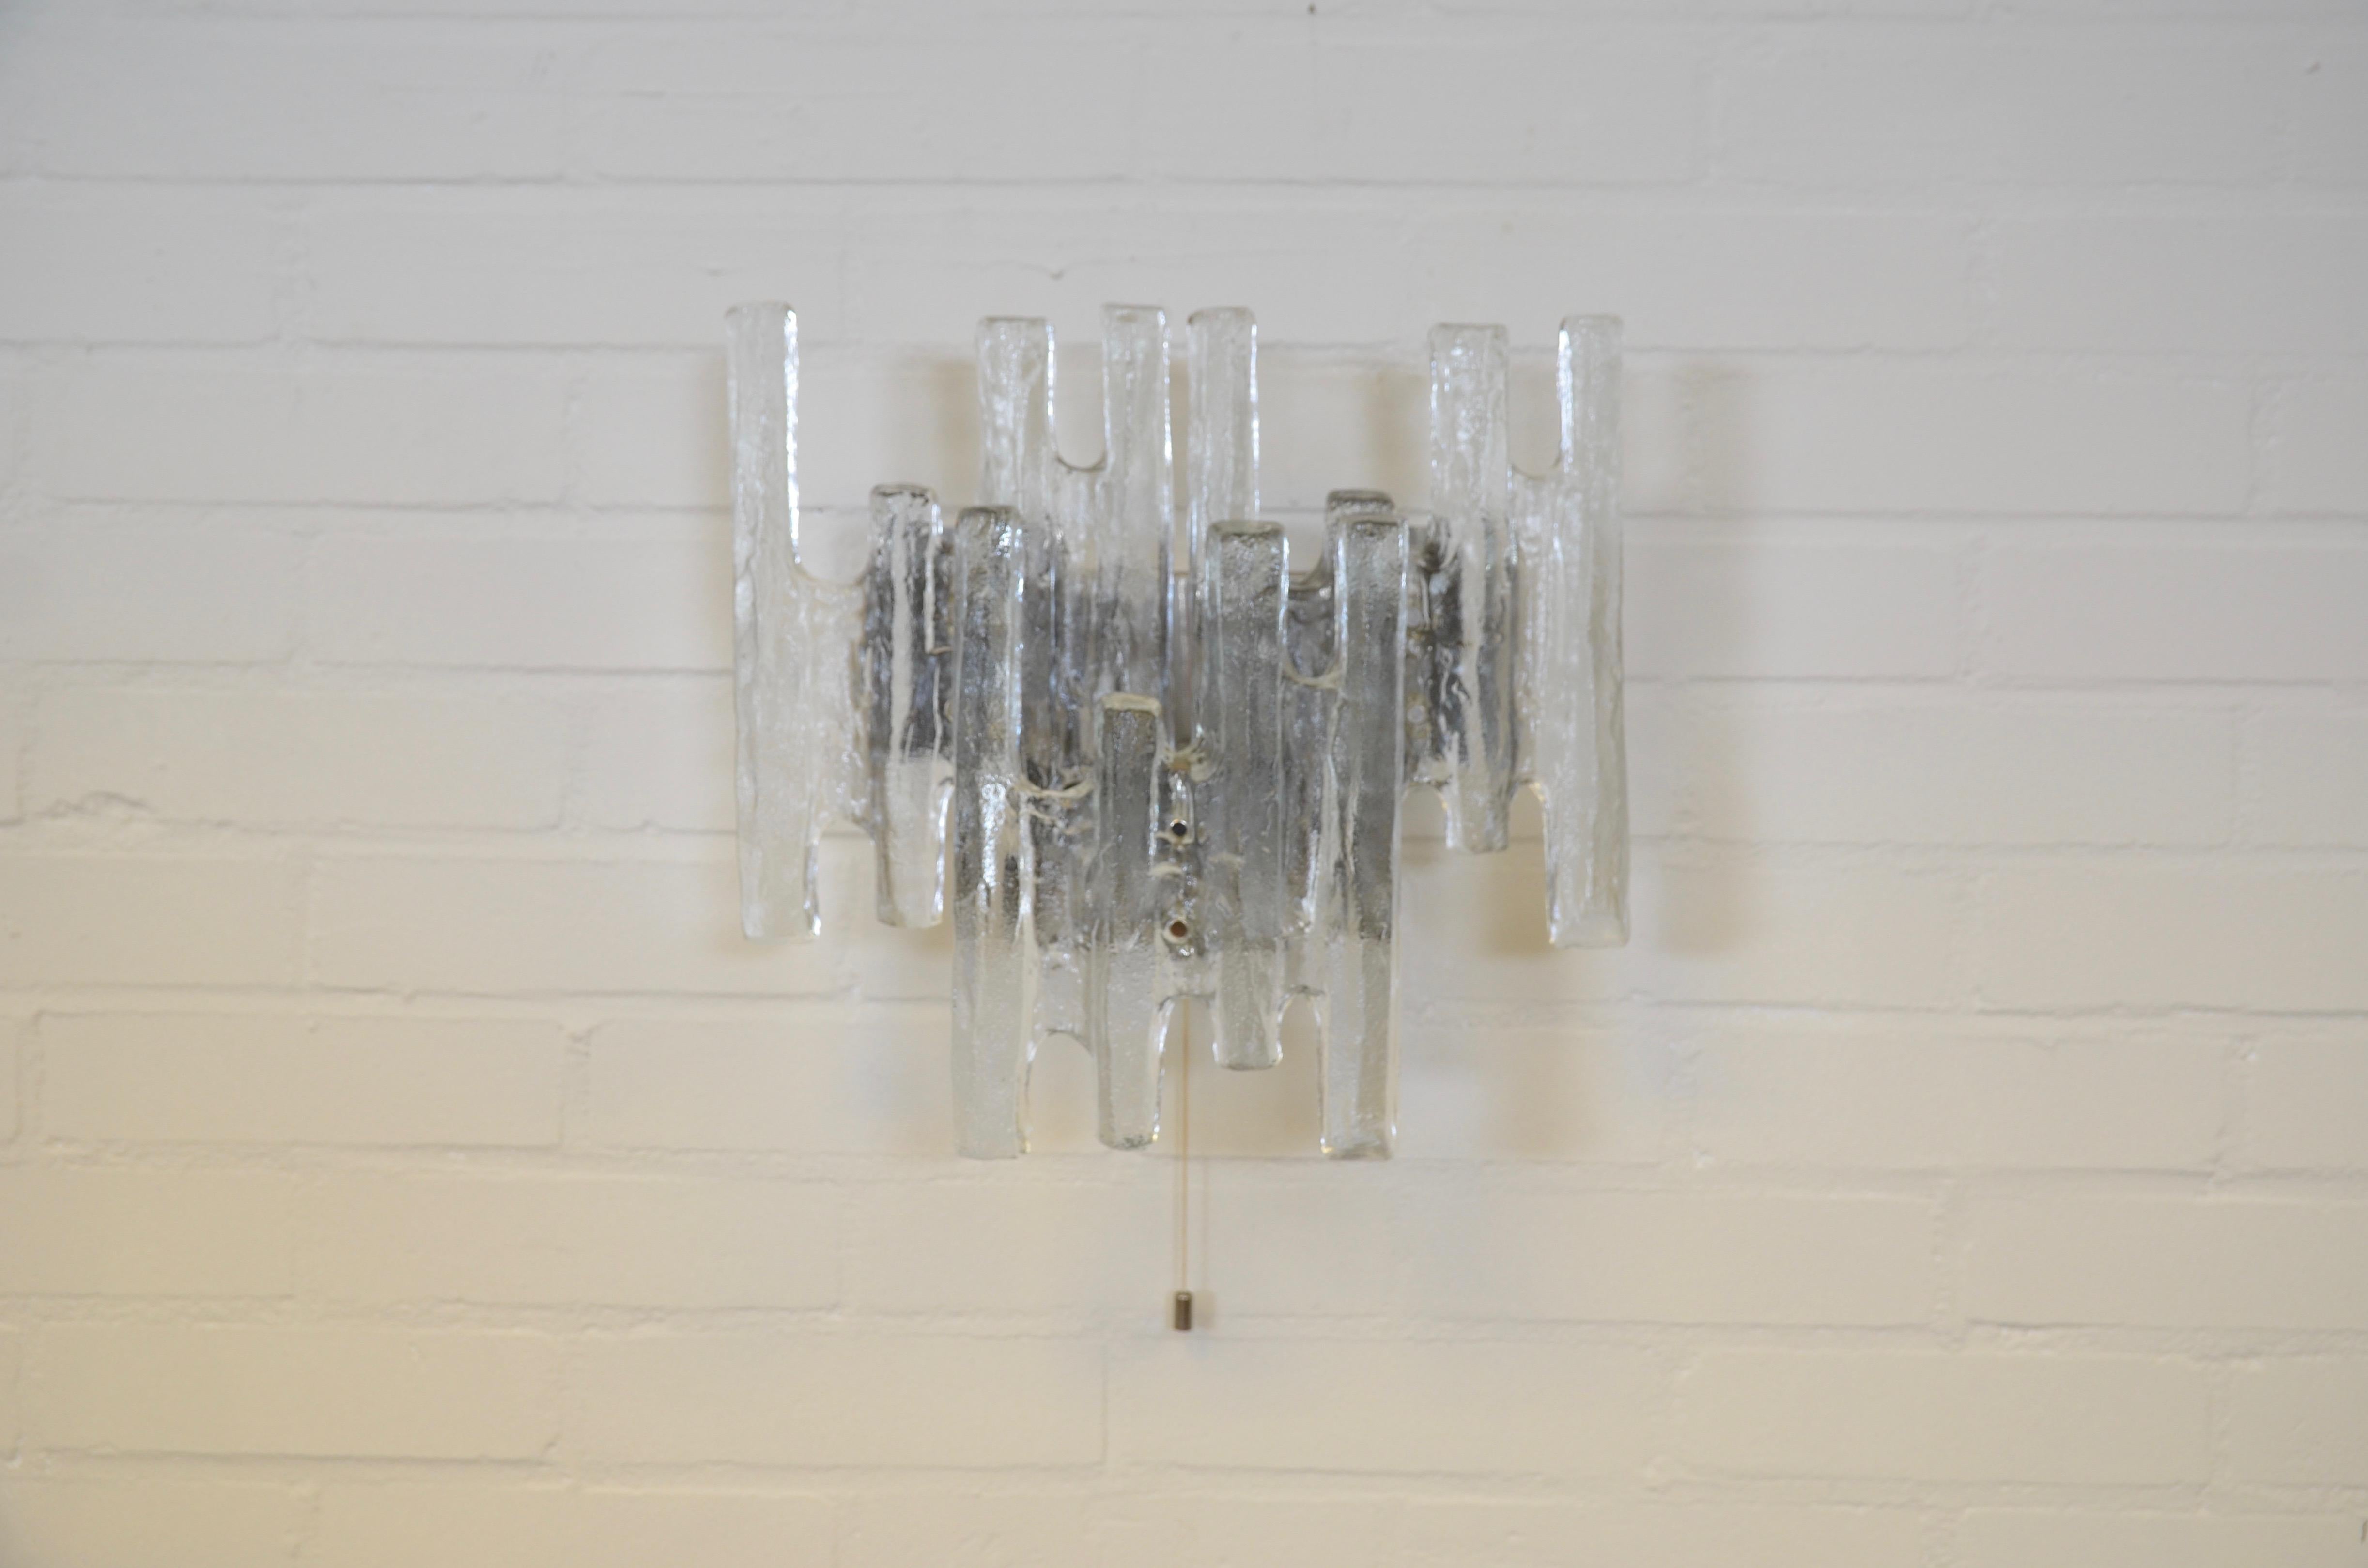 Heavy wall light in glass which looks like a piece of art. The lamp is named Pan, obviously referring to typical form a panflute. It spreads a wonderful light through the shape of the glass panel and the use of frosted glass. Three fixtures